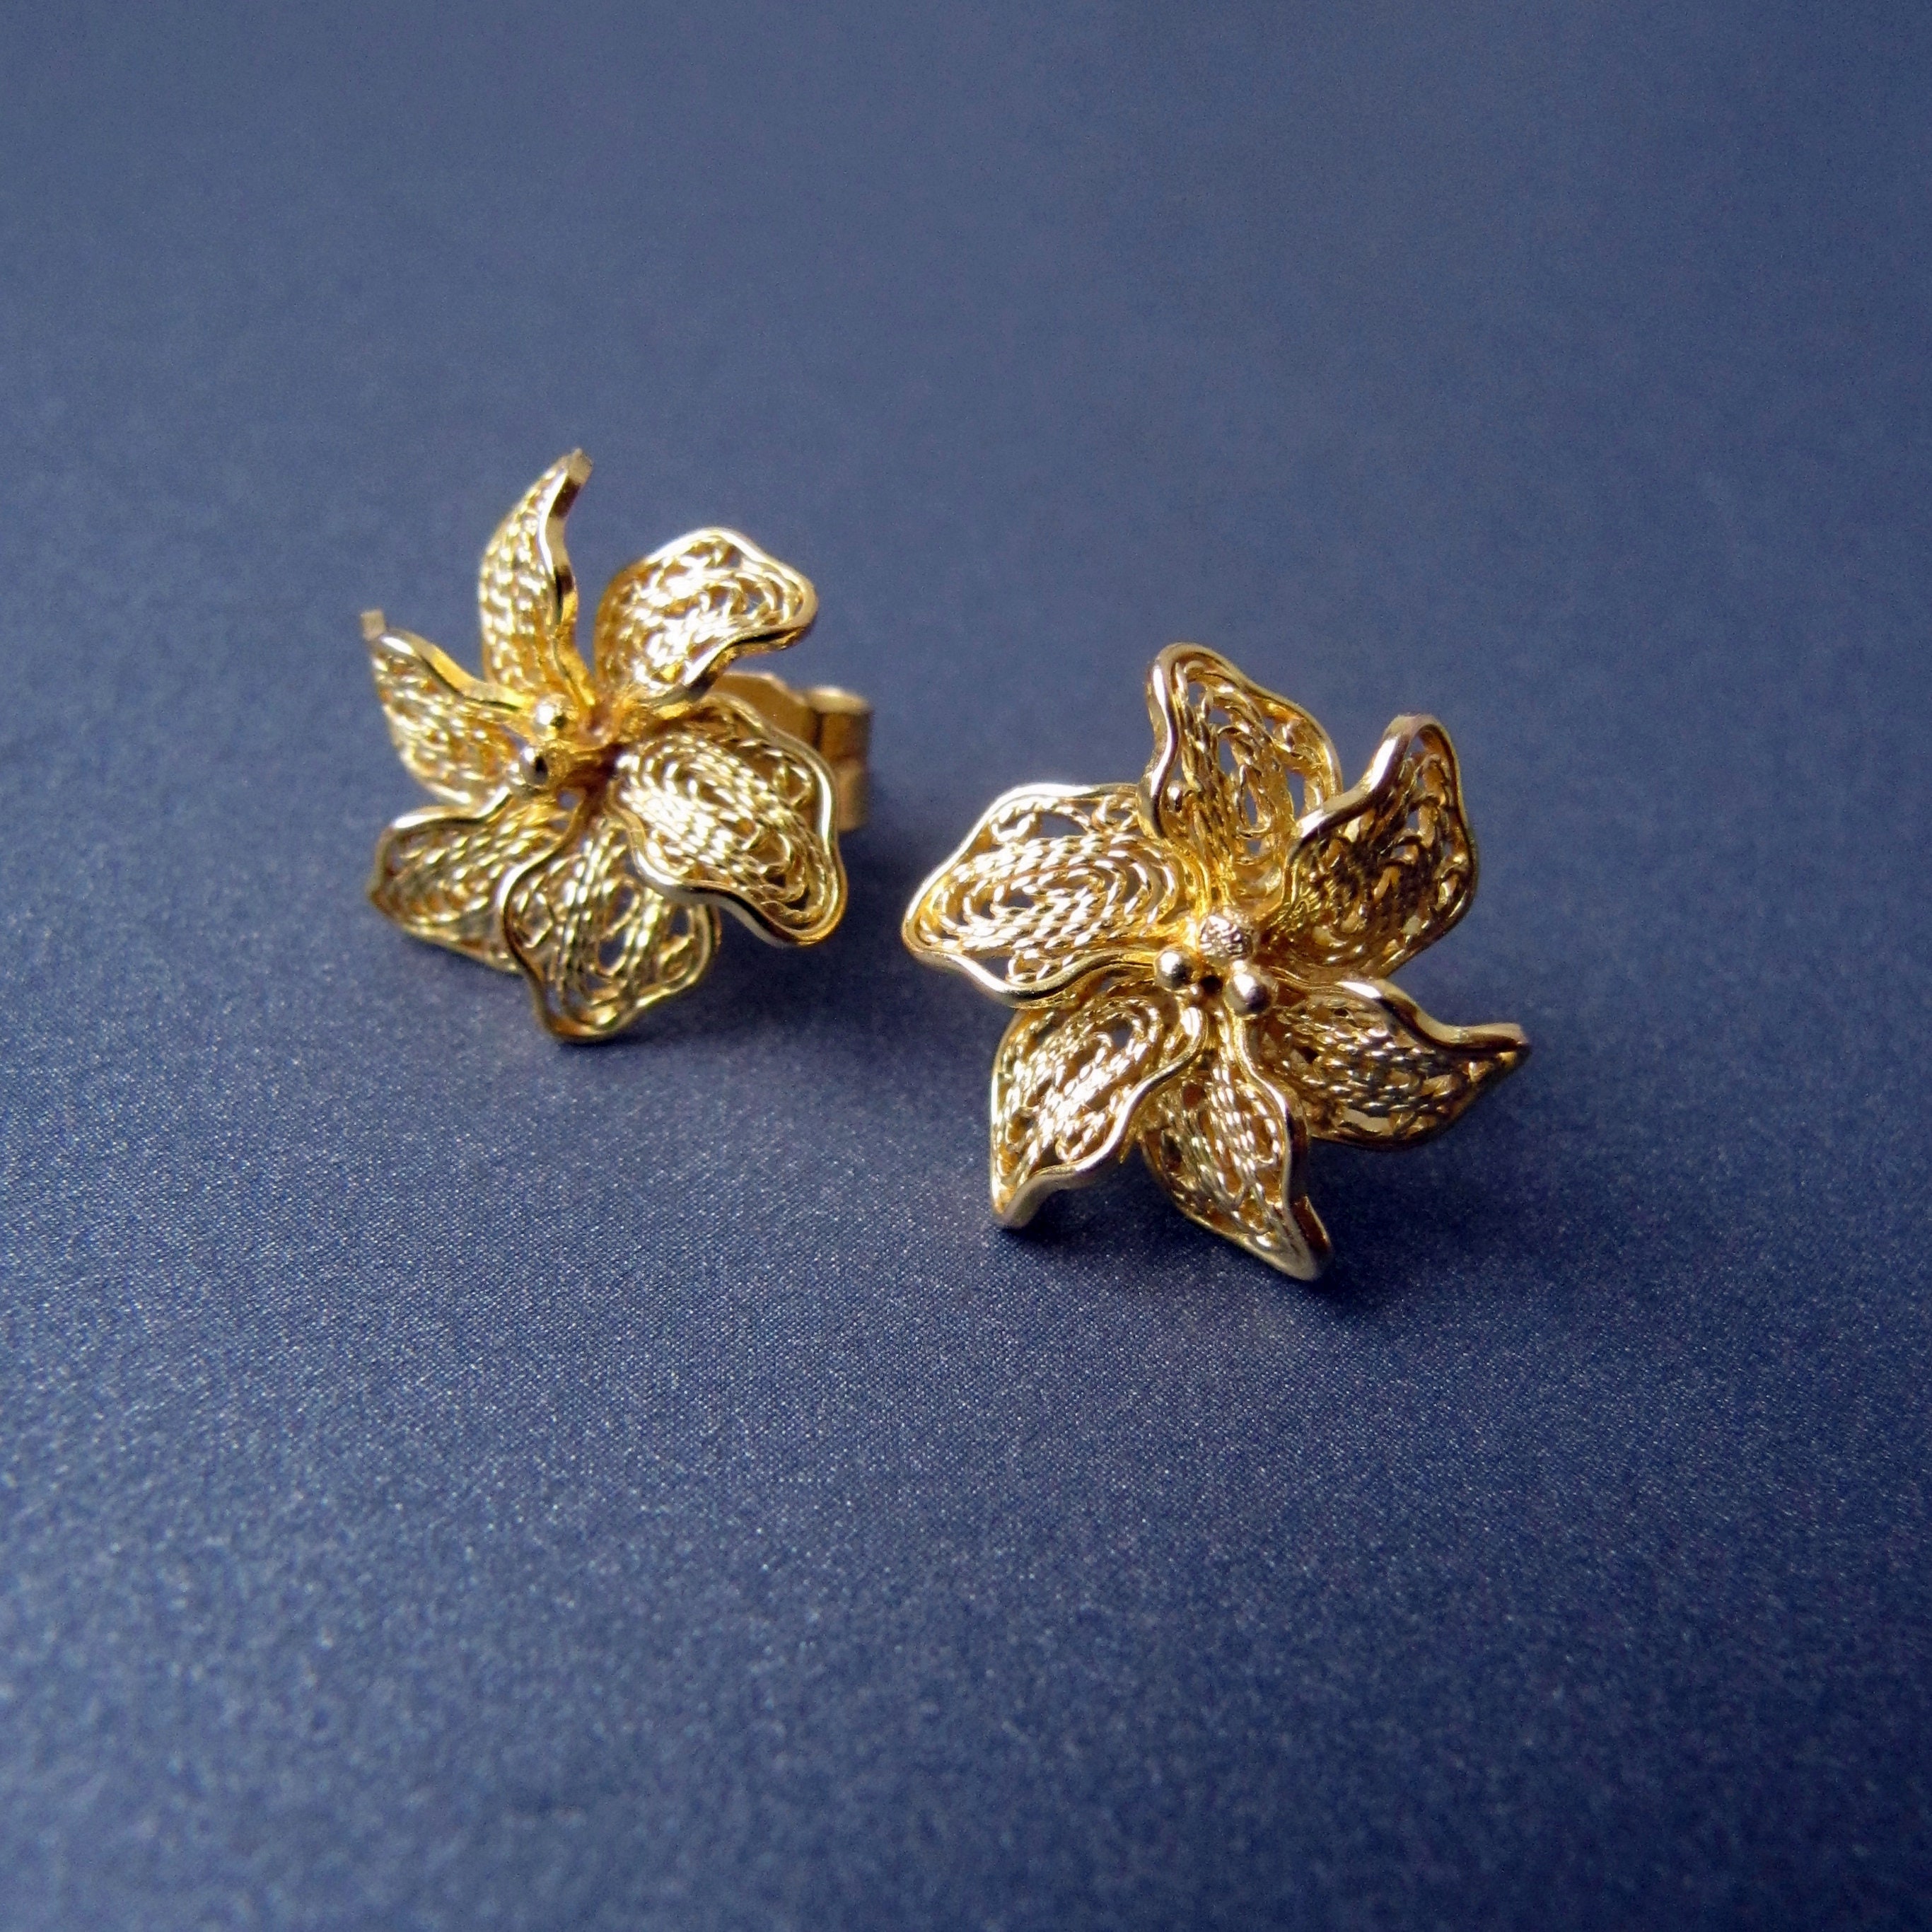 6mm Button Stud Earrings in 14K Yellow Gold with Silicone Backs by Lavari  Jewelers